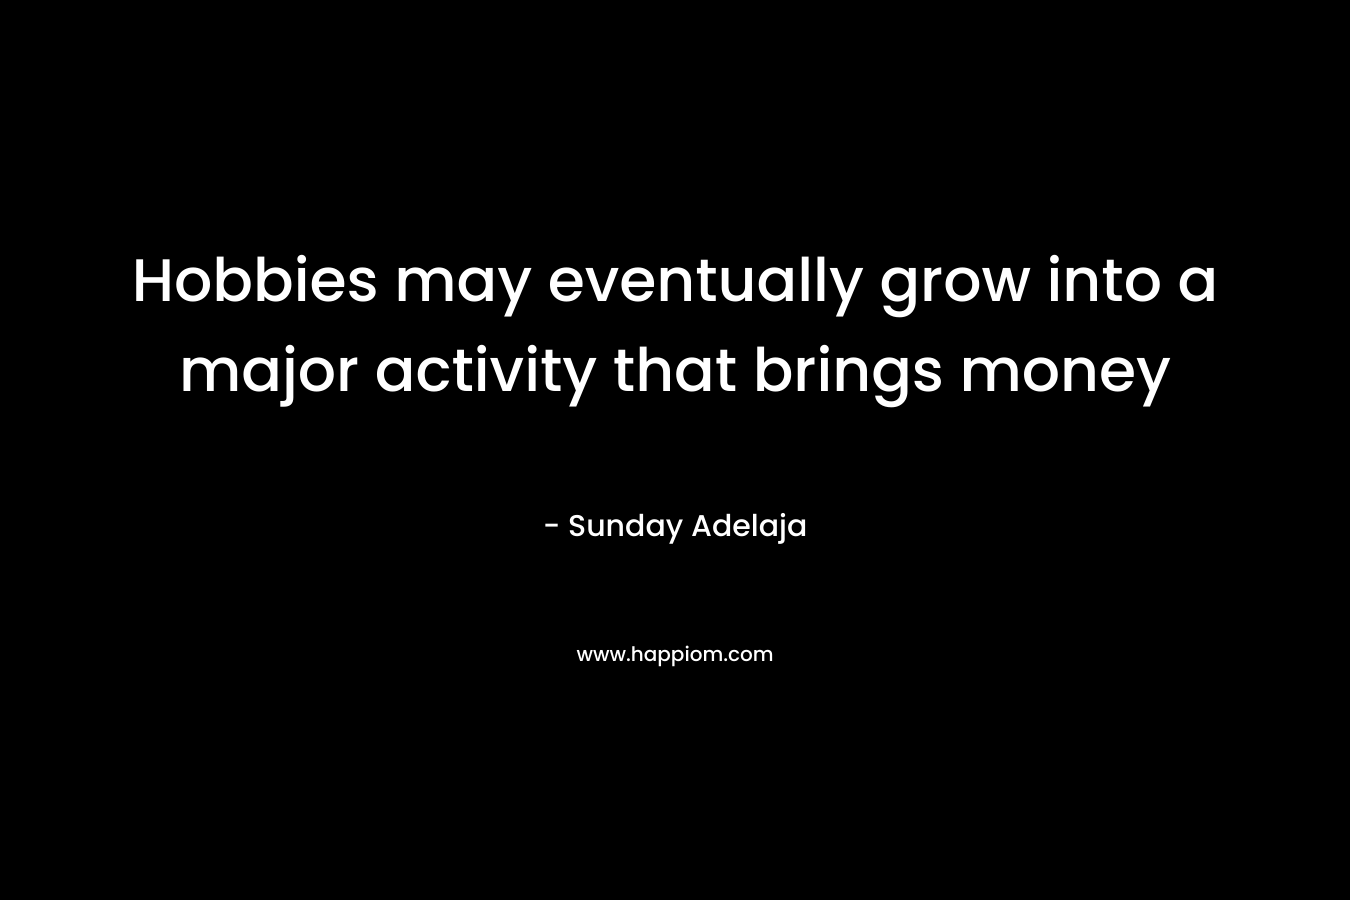 Hobbies may eventually grow into a major activity that brings money